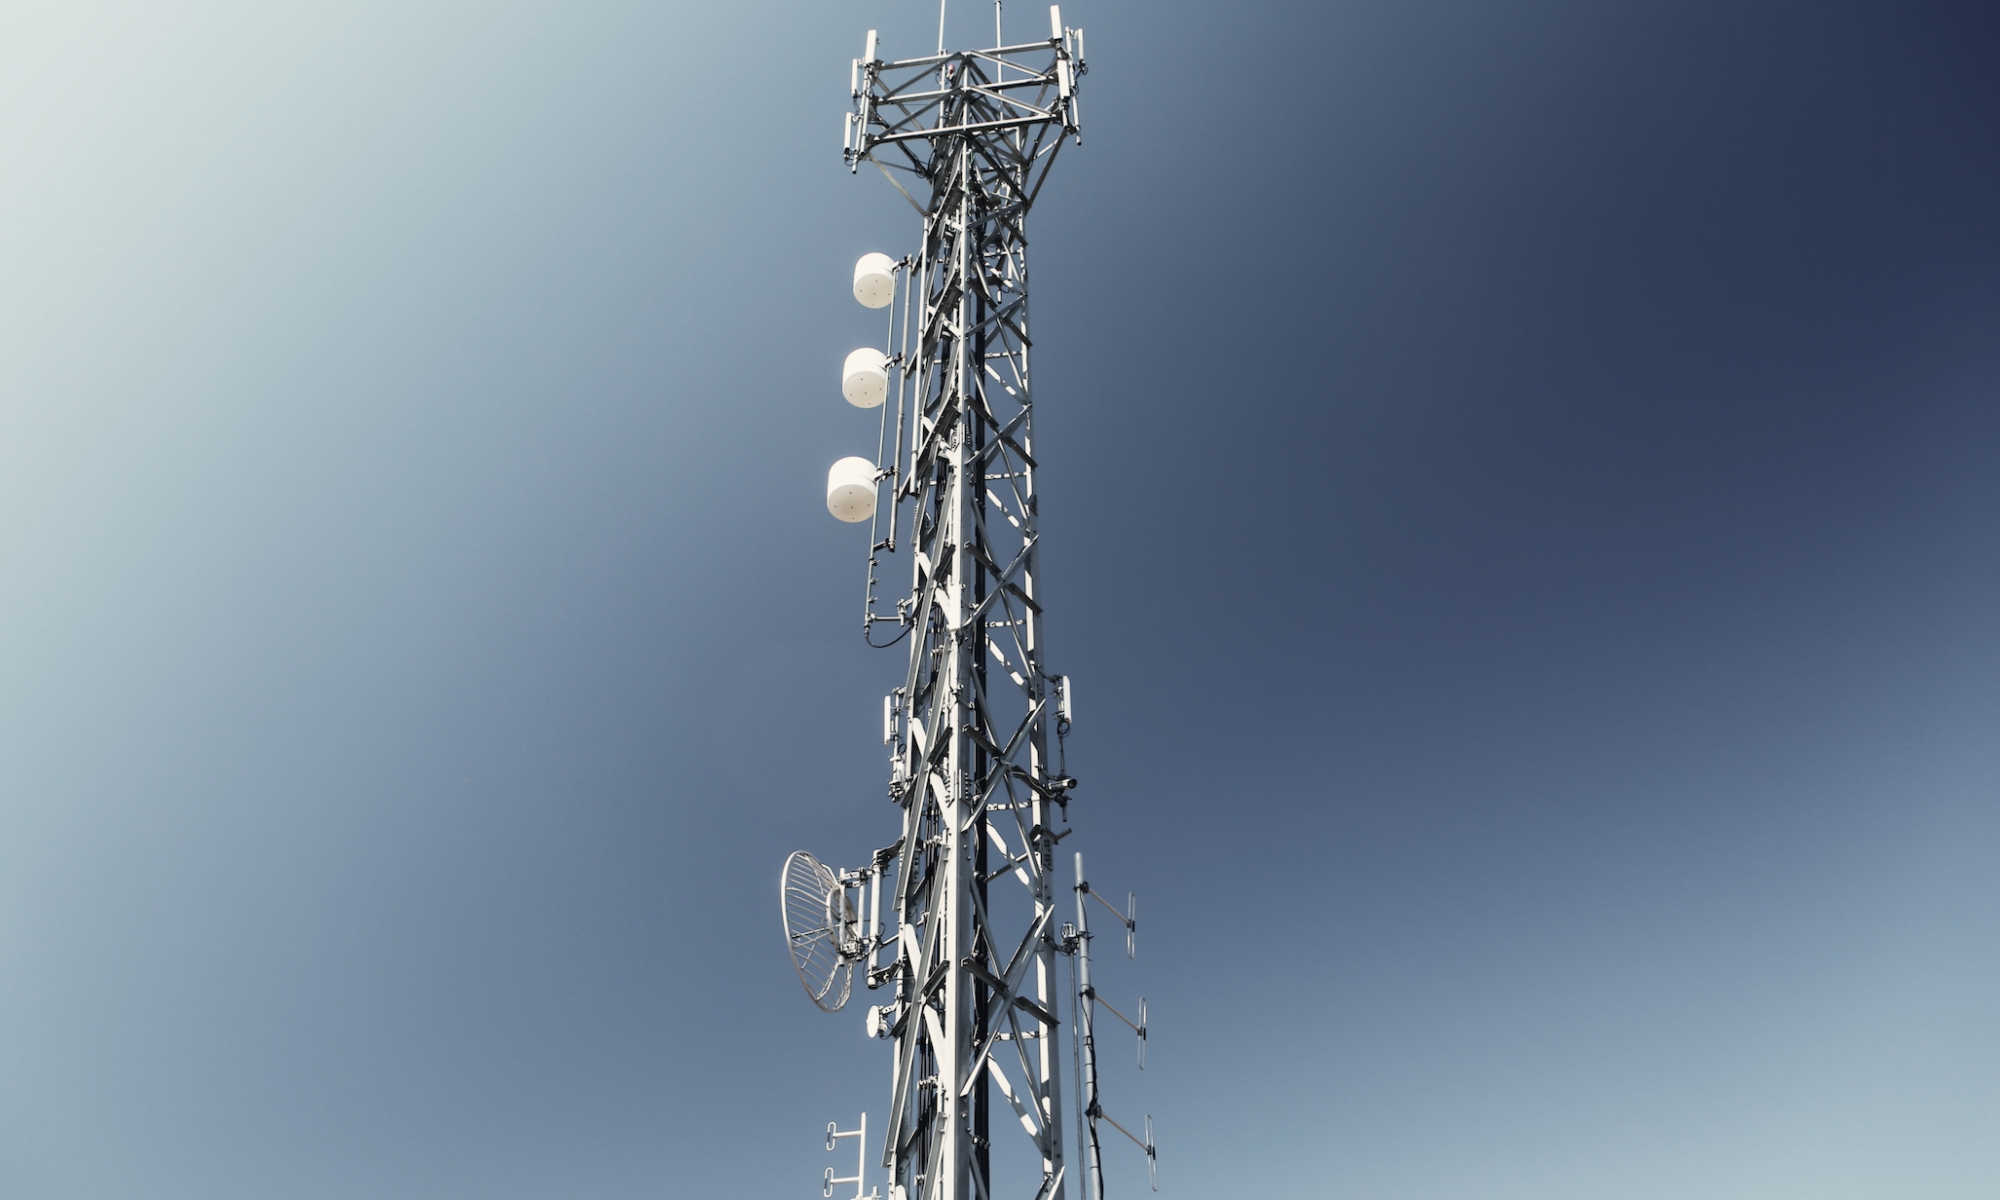 A cell tower with a blue sky in the background.